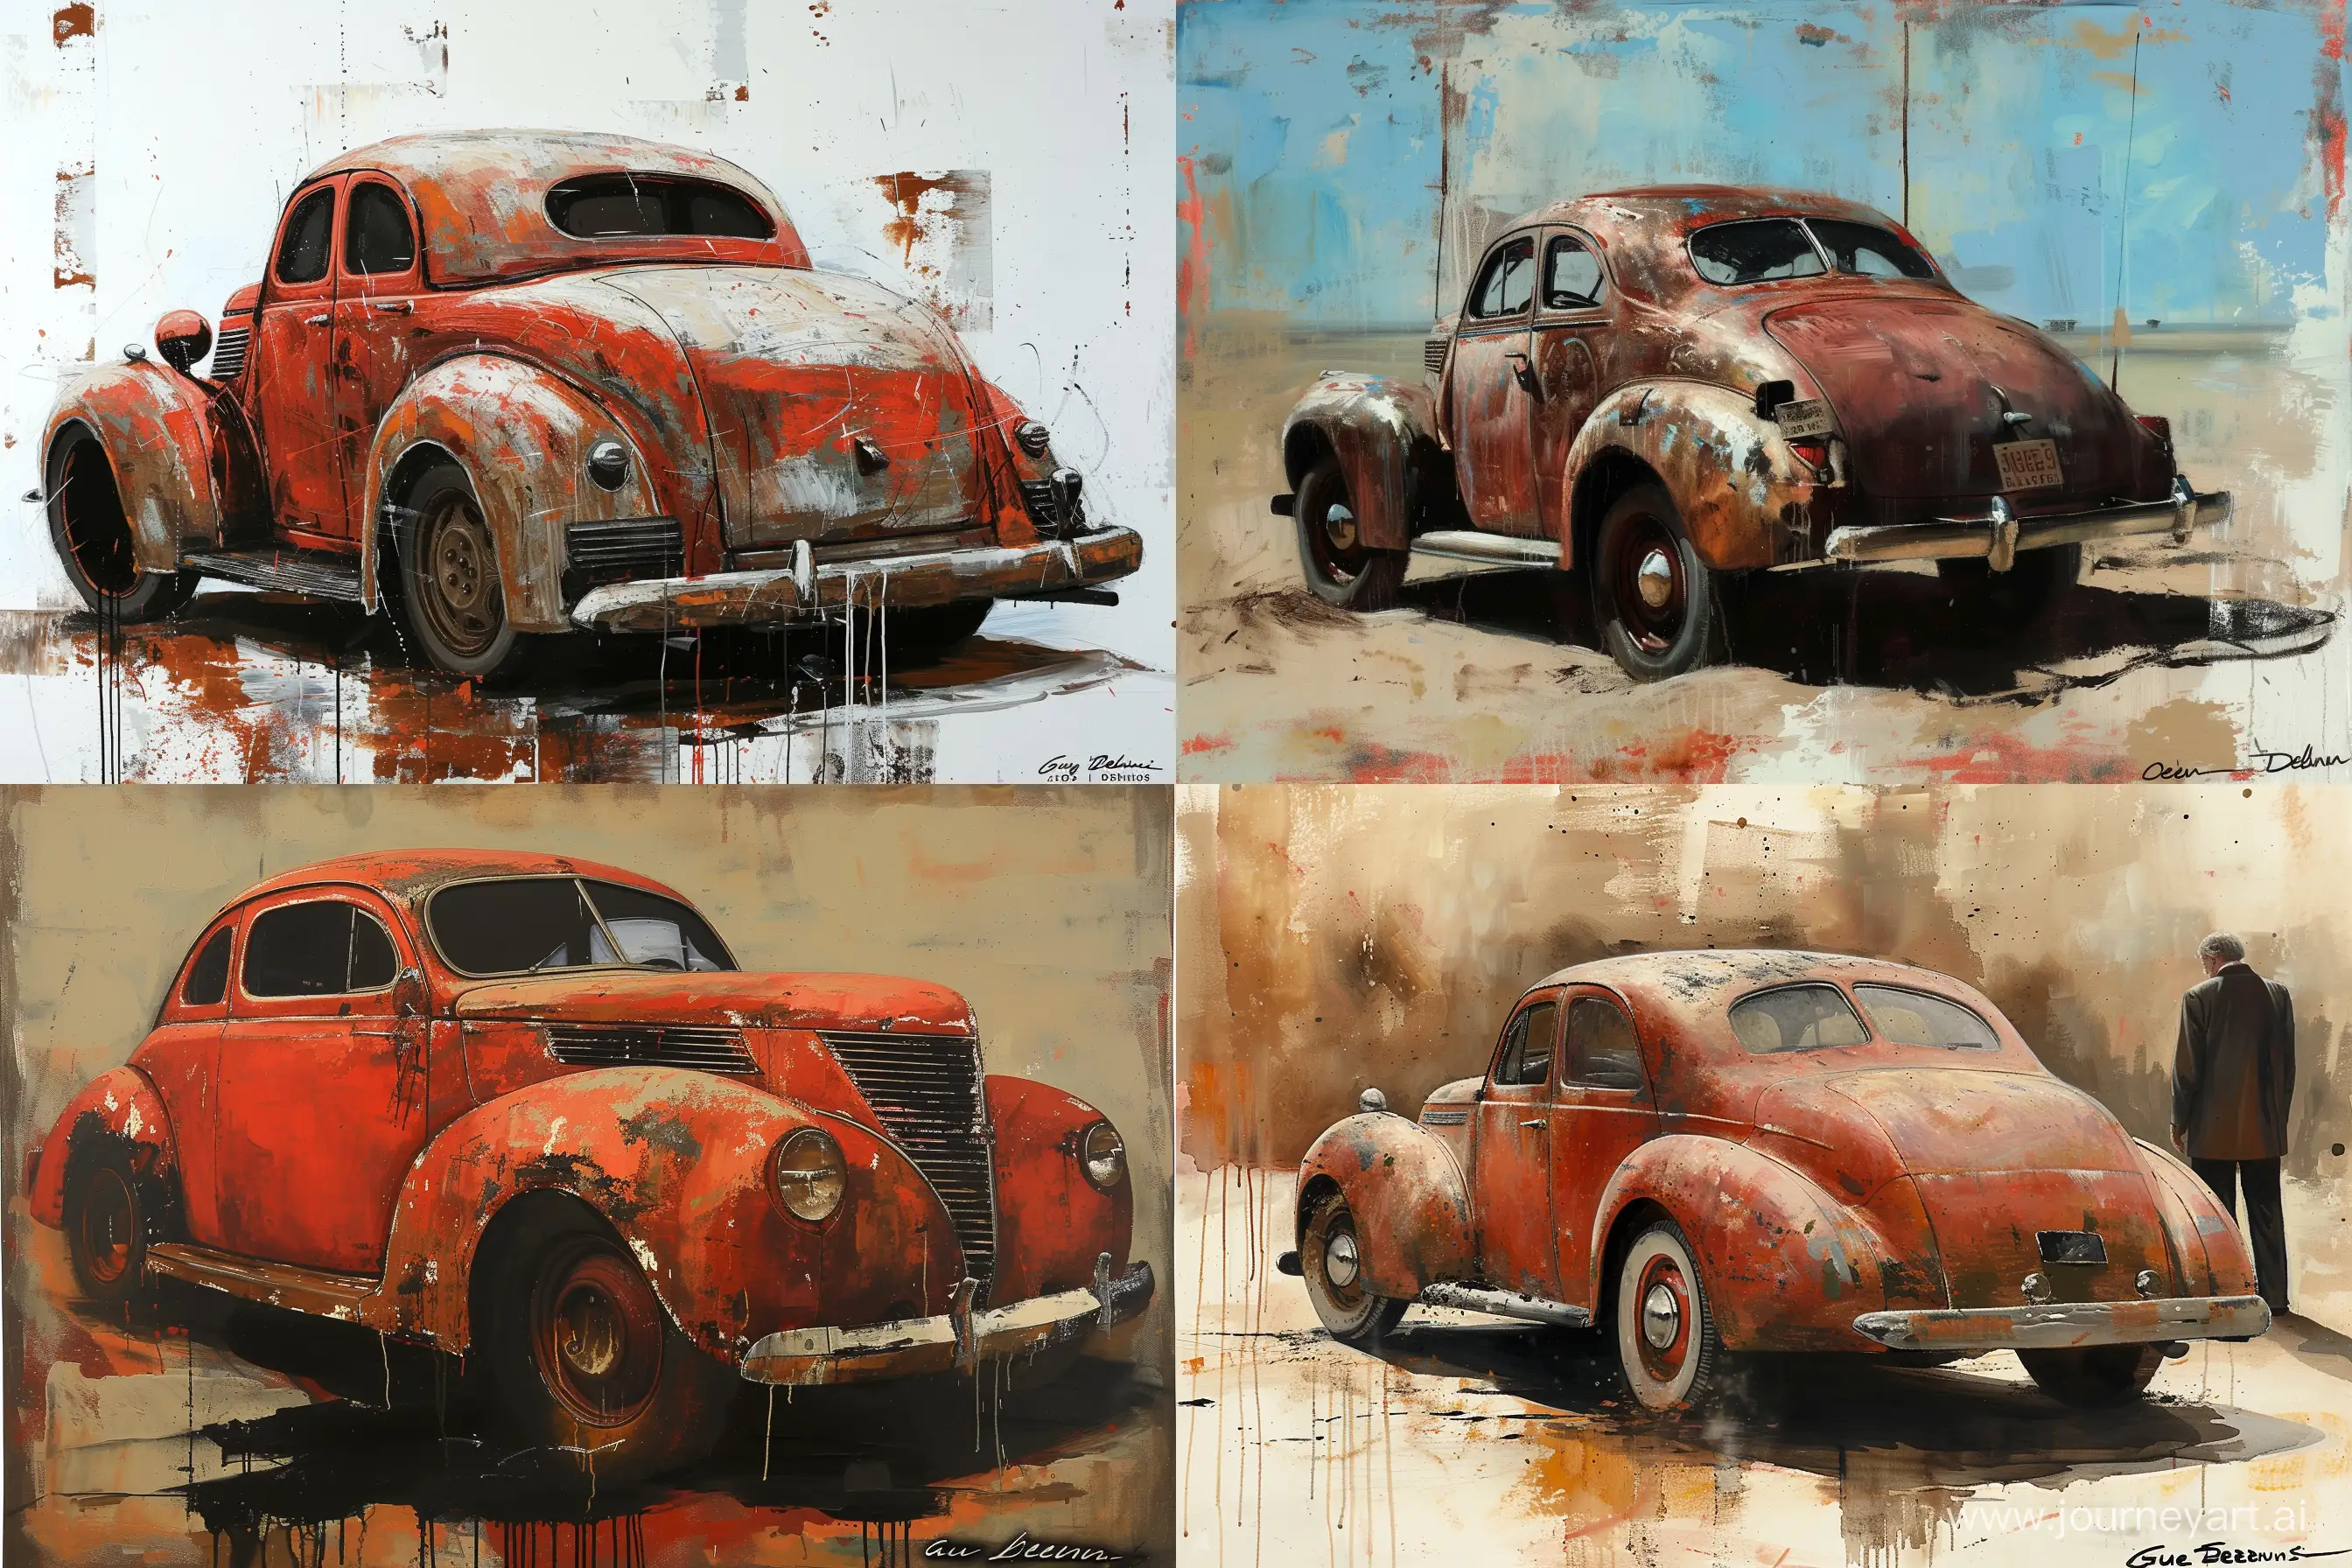 Guy Denning's painting depicting a old vintage car from 1940, no signature --v 6.0 --ar 3:2